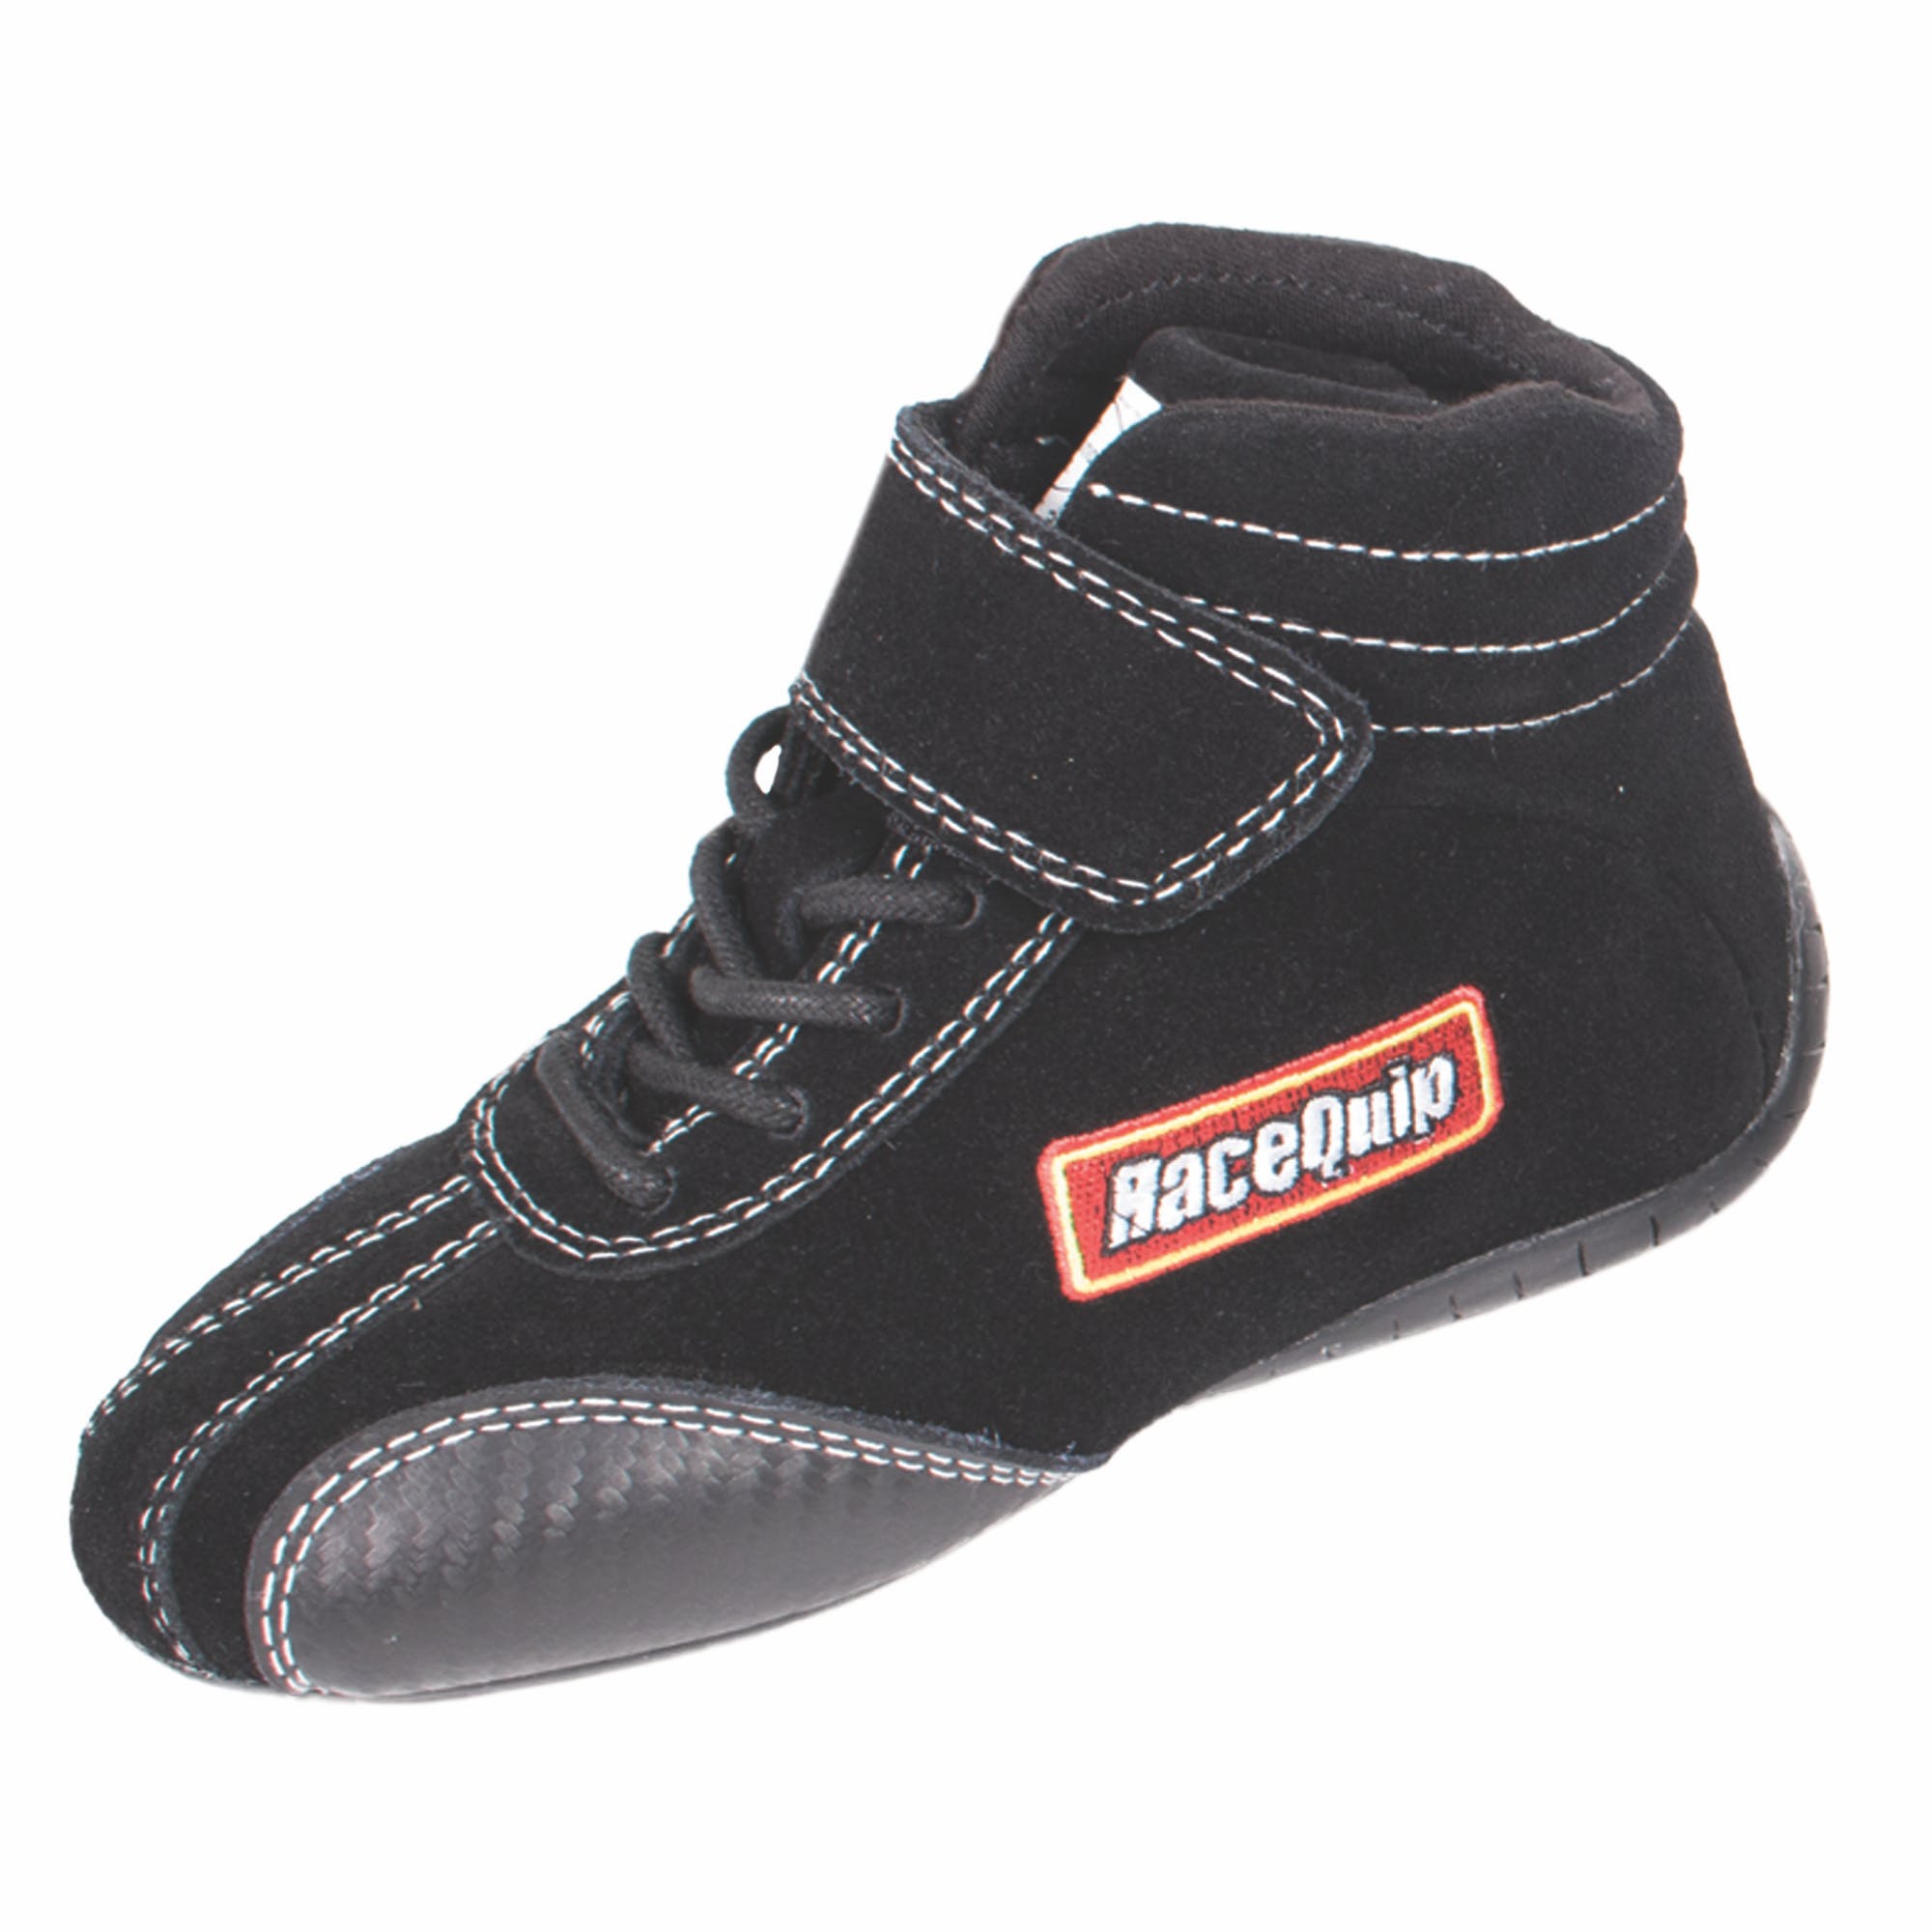 RaceQuip 30400910 Euro Carbon-L Series Race Shoes SFI 3.3/ 5 Certified; Black Youth Size 10